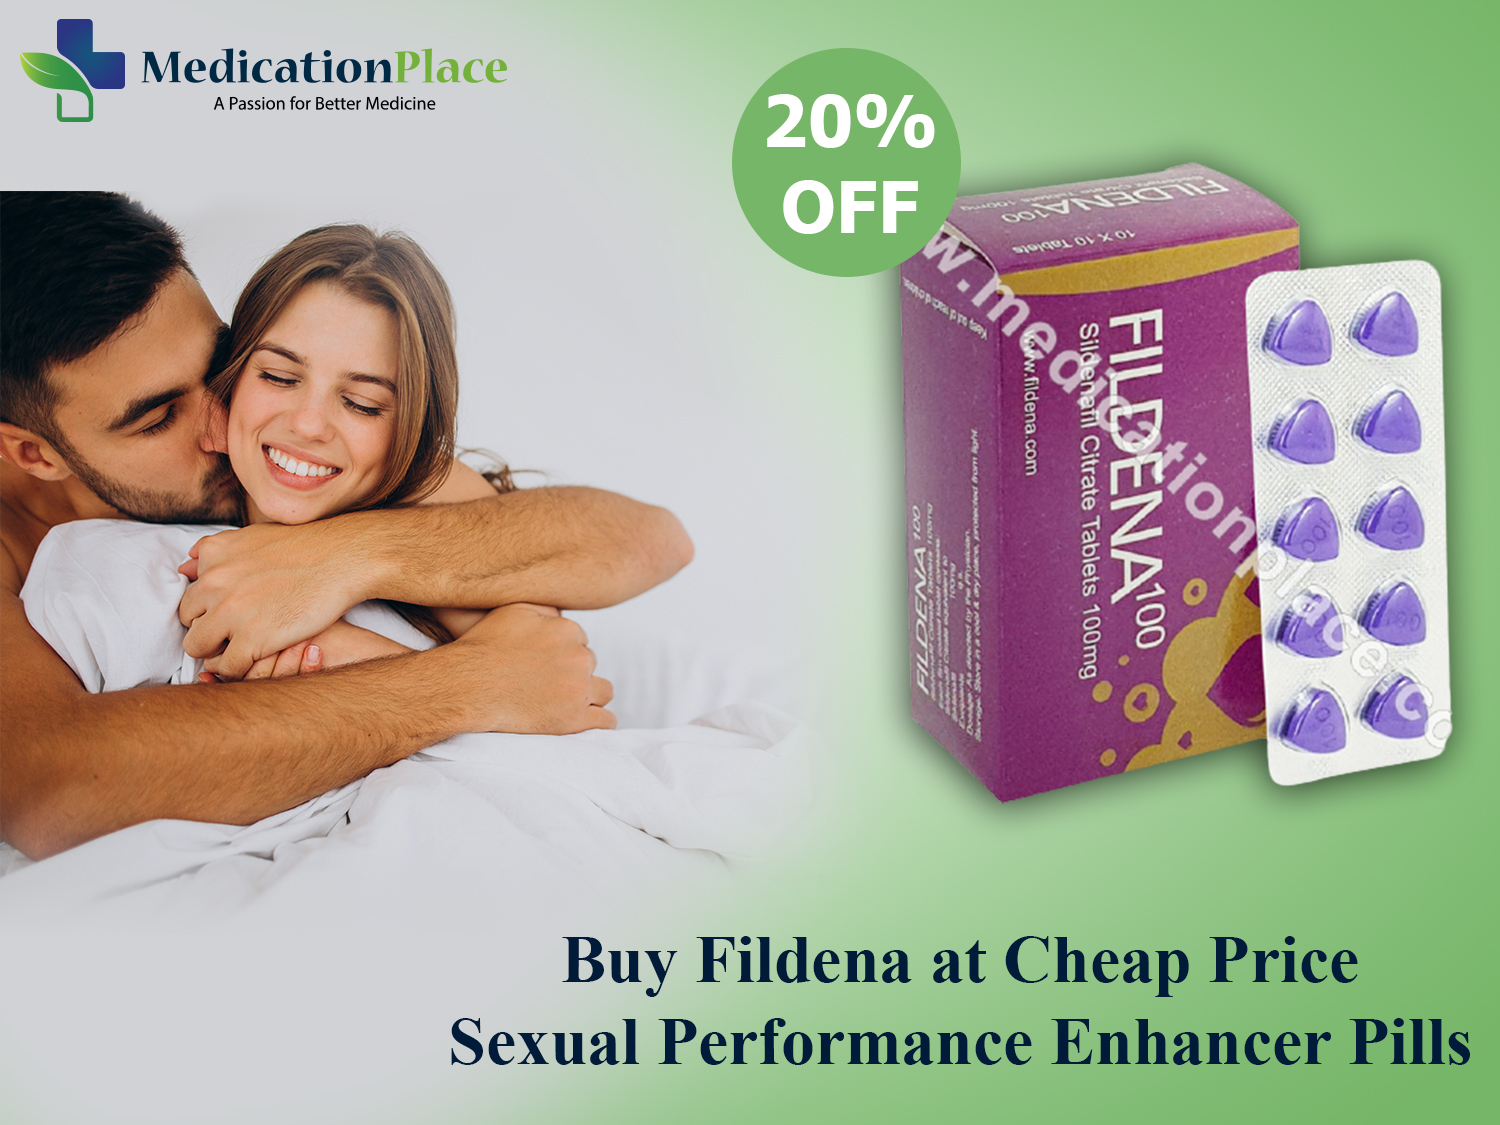 Buy Fildena at Cheap Price | Sexual Performance Enhancer Pills - Medication Place